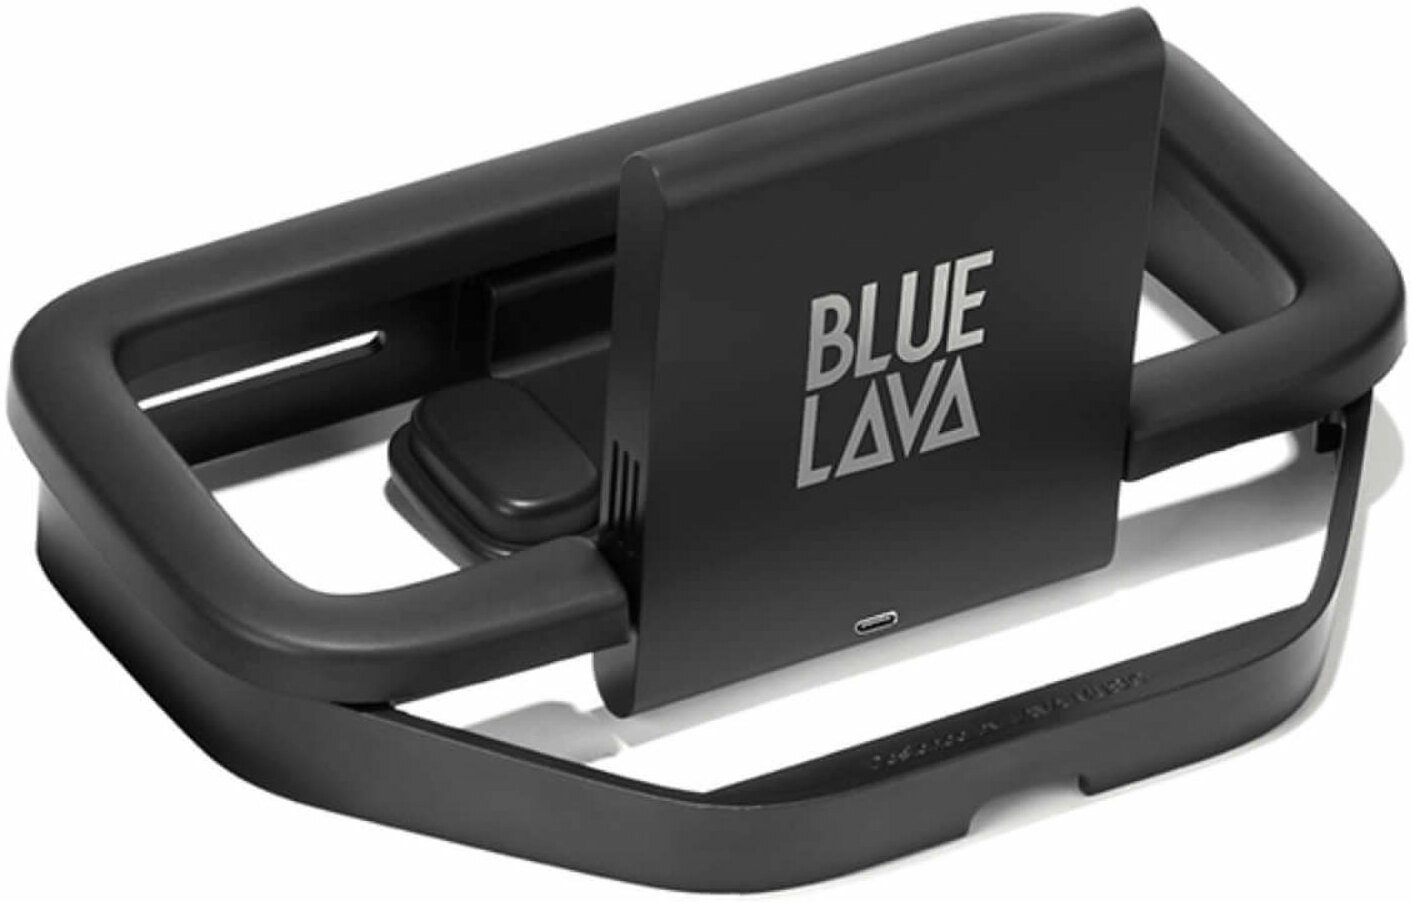 Lava Music Airflow Wireless Charger Blue Lava Guitar Stand - Battery - Main picture